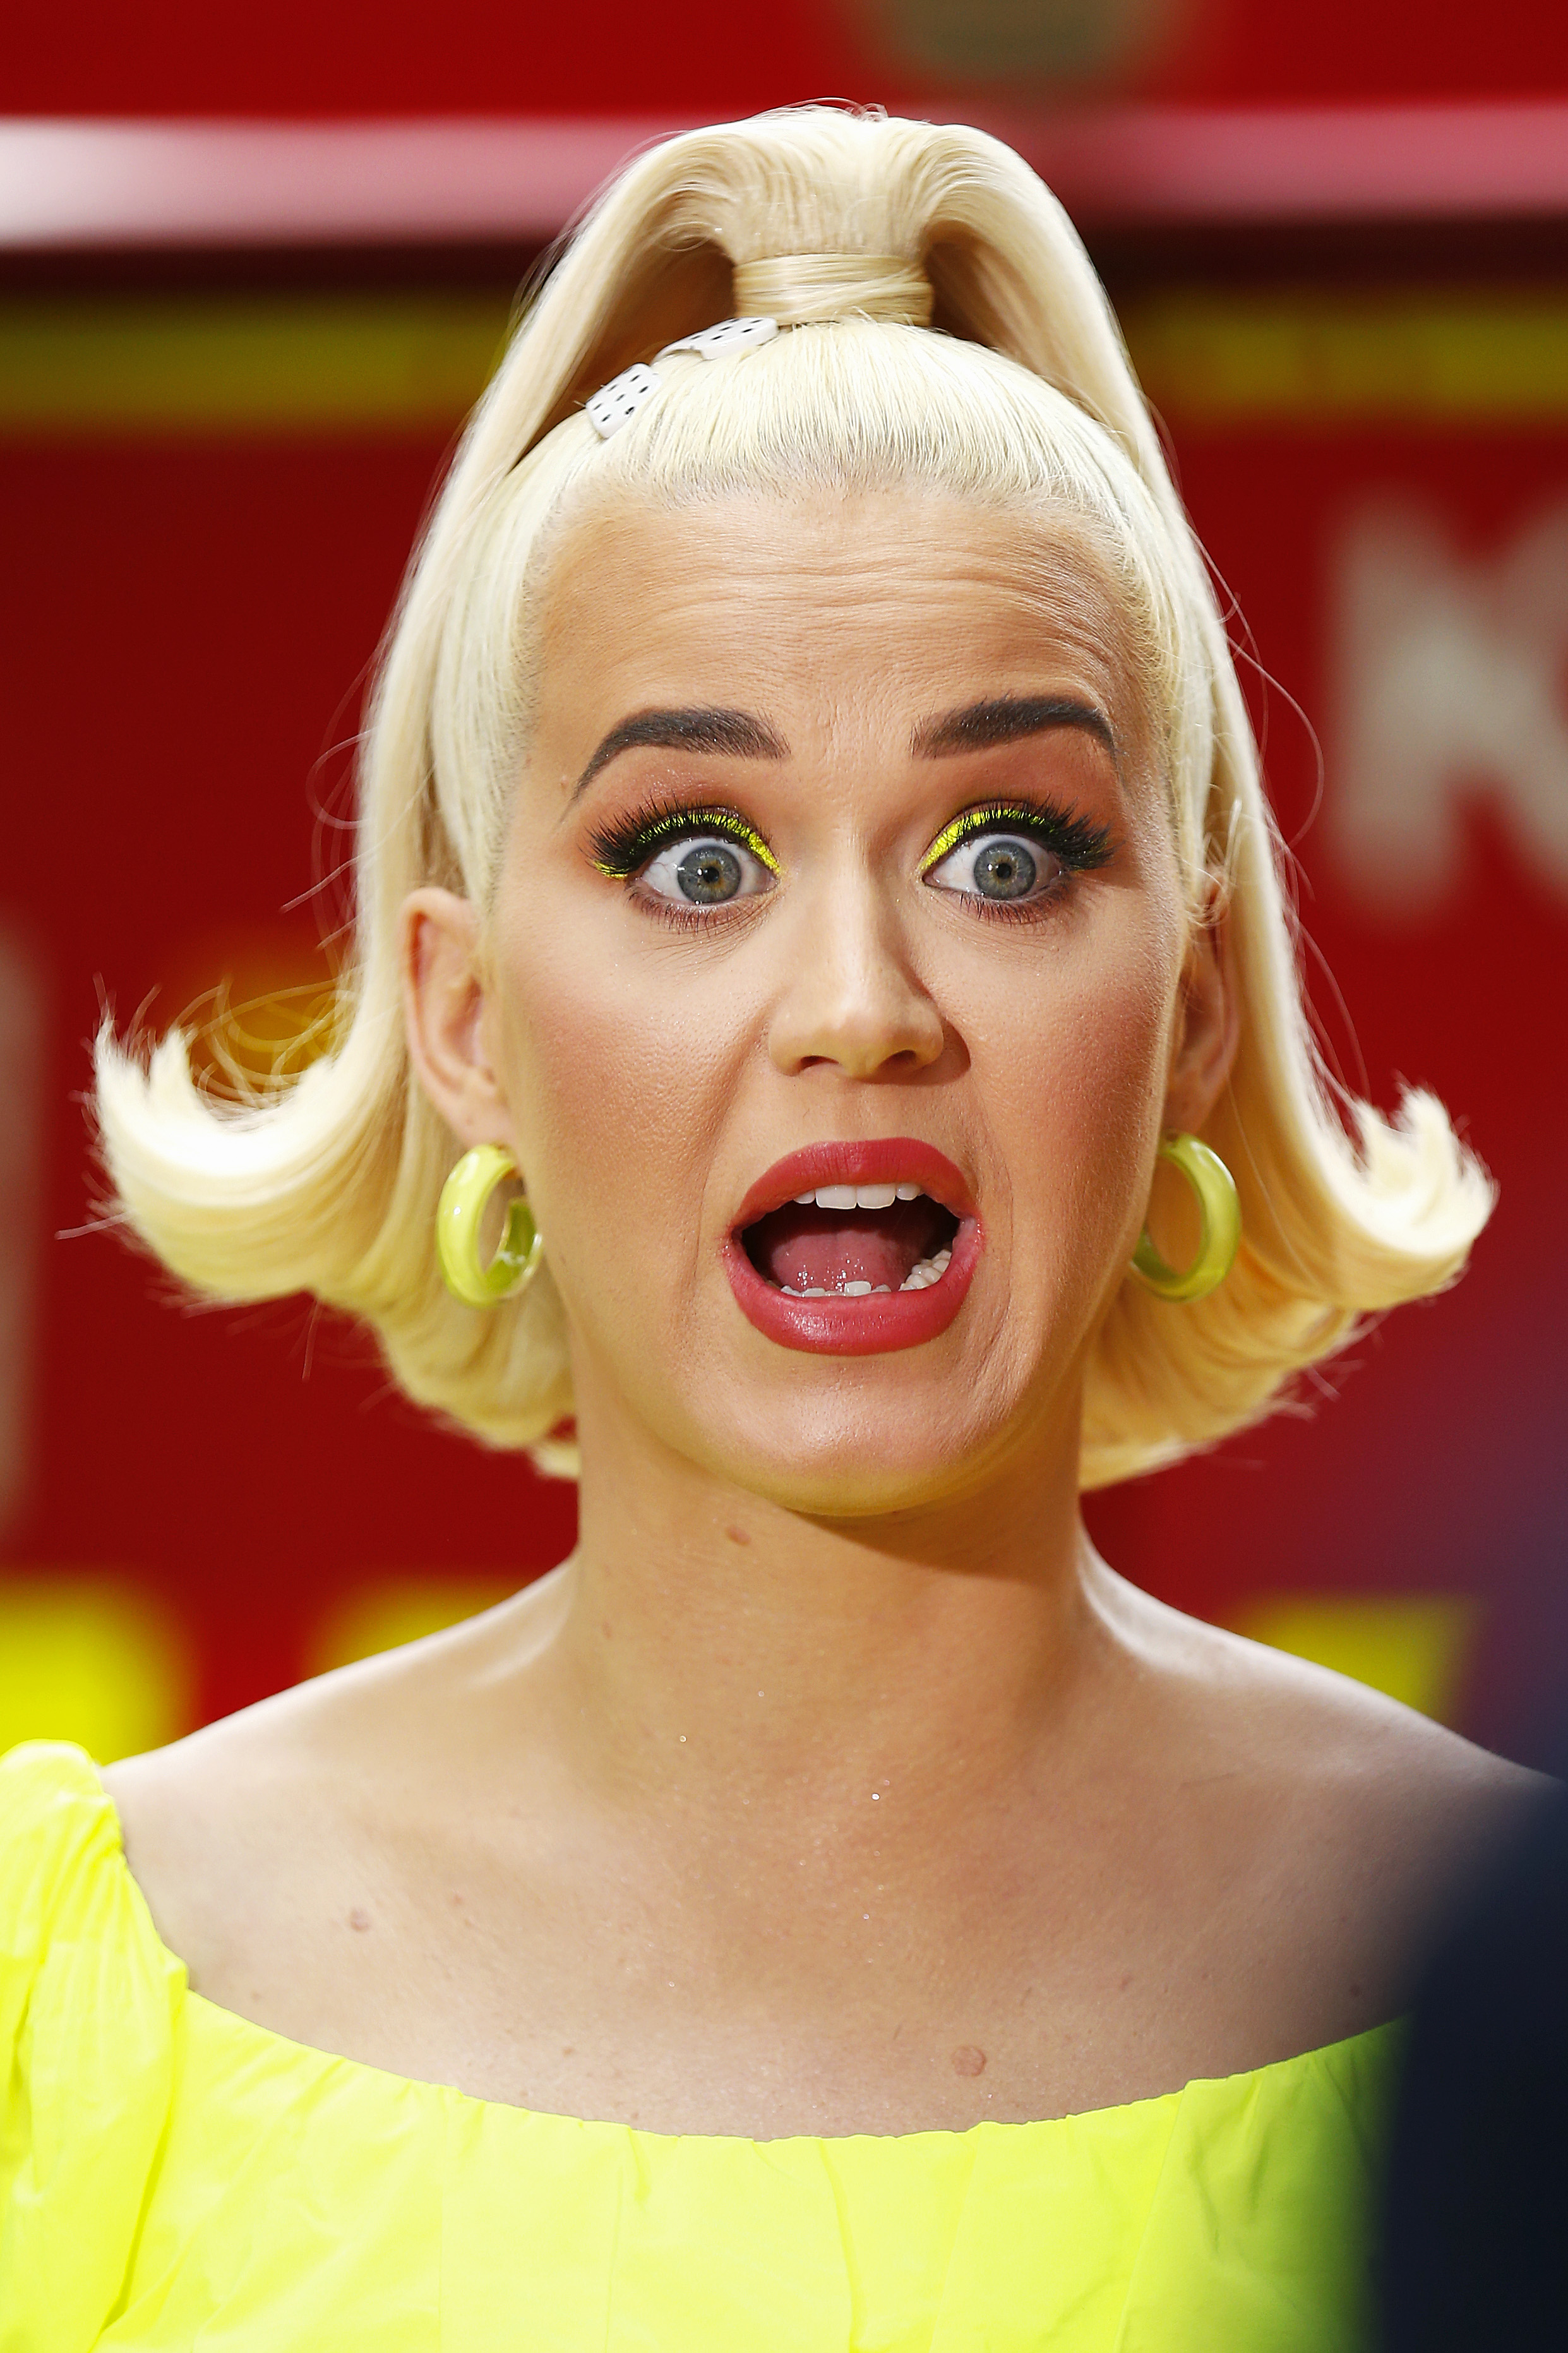 Katy Perry speaks to media on March 11, 2020, in Bright, Australia. | Source: Getty Images